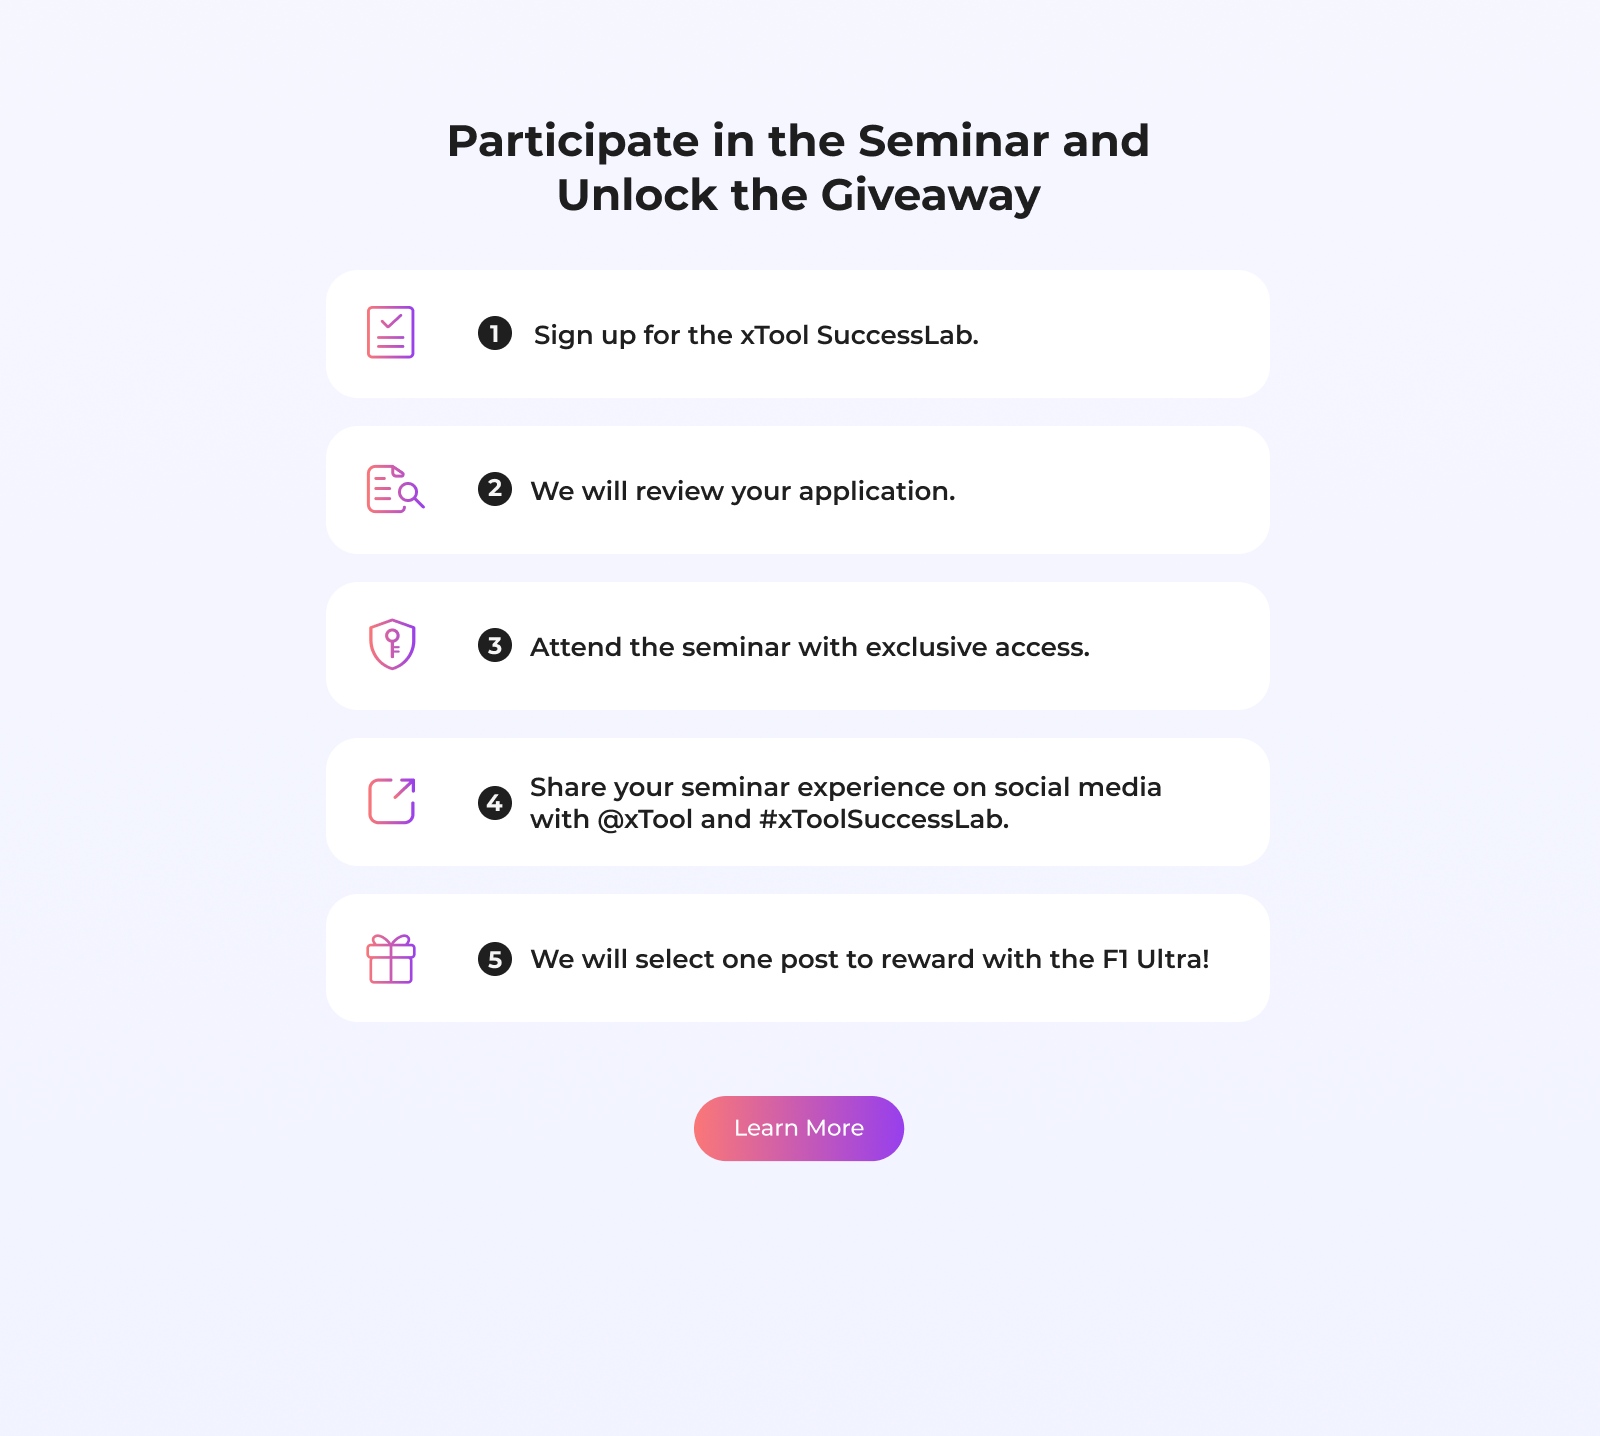 Participate in the Seminar and Unlock Giveaway